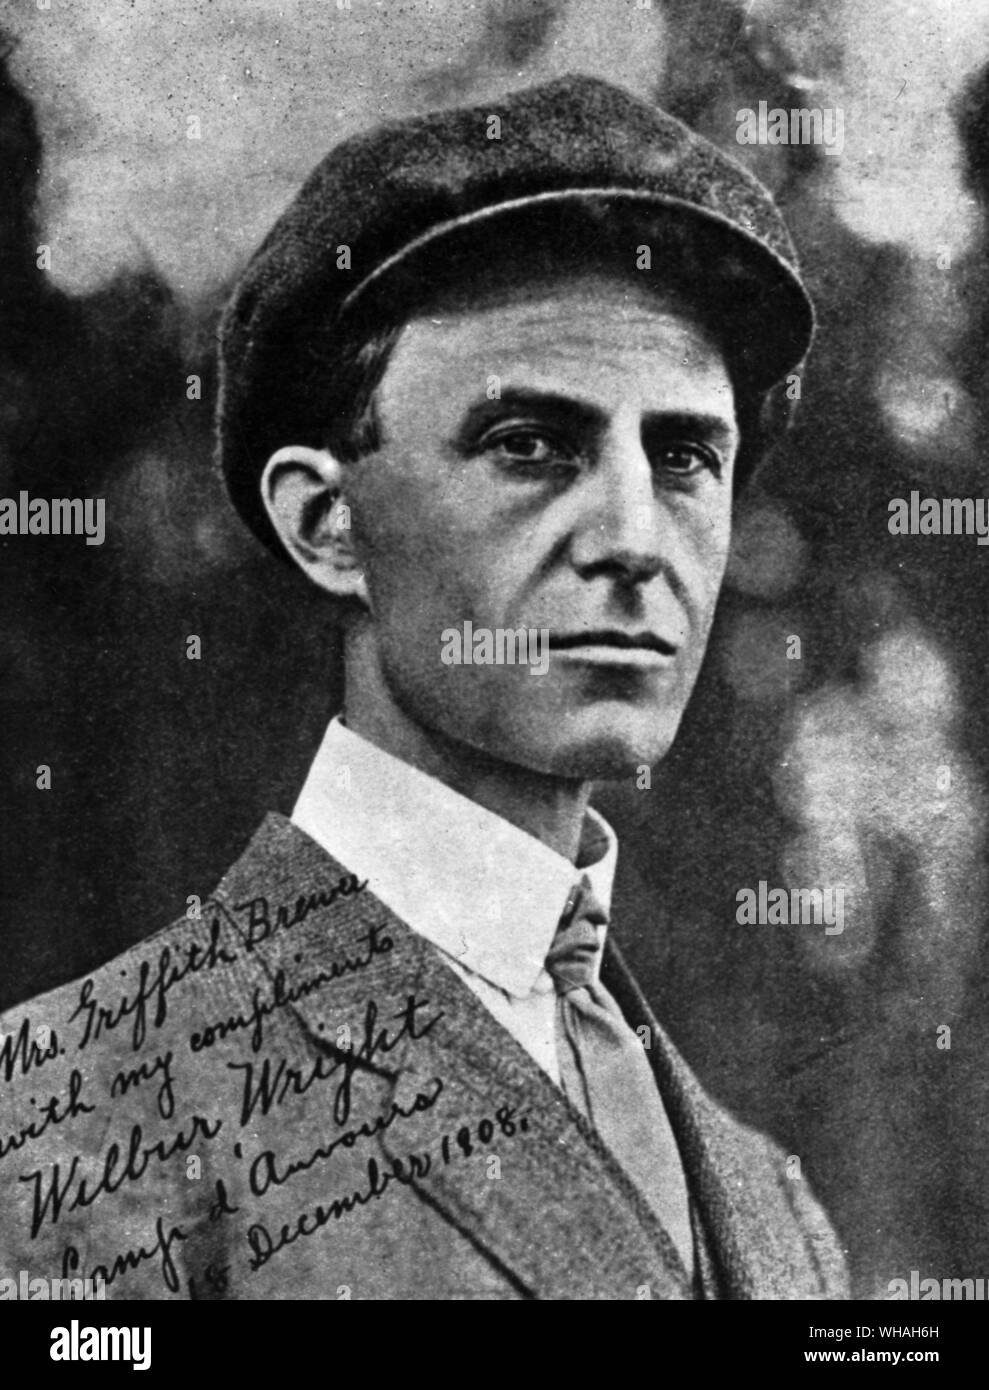 Wilbur Wright 1867-1912. Wright, Wilbur US airplane designer and aviation pioneer; with Orville Wright, co-invented 1st airplane (1st heavier than air flying machine) 1903; brother of Orville Wright  1867-1912 . . Stock Photo